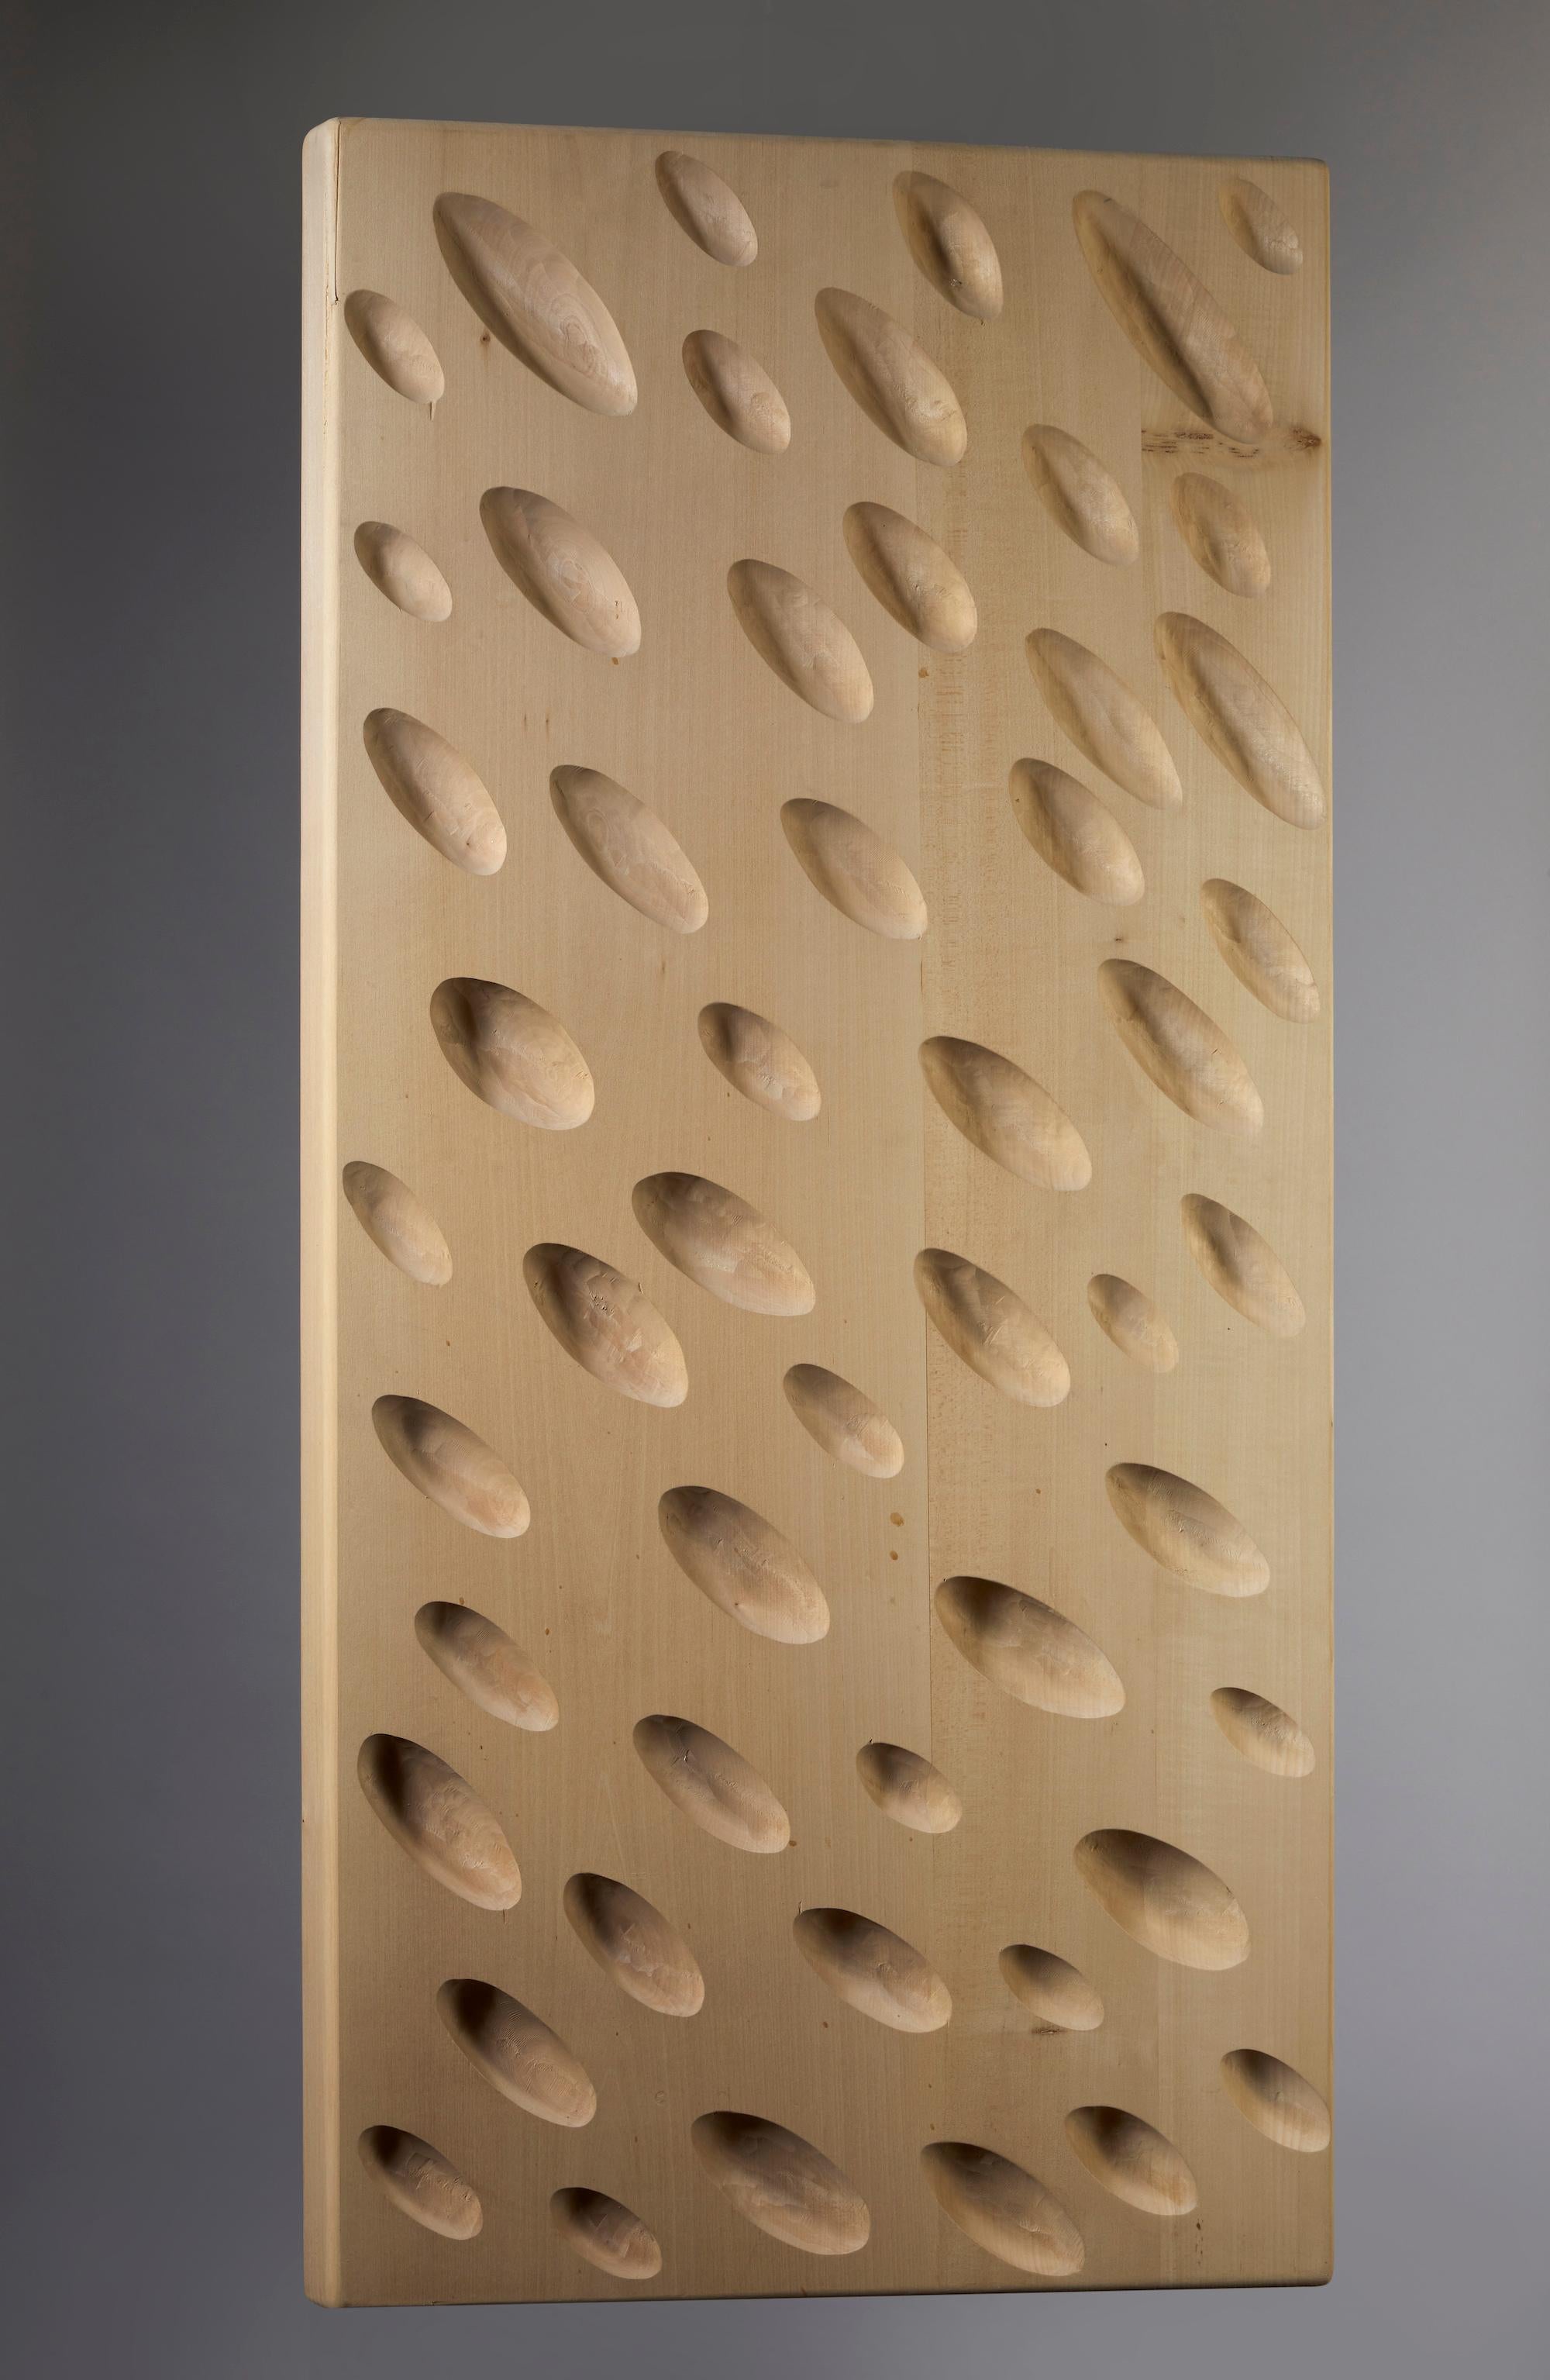 Giuseppe Rivadossi (Nave, July 8, 1935)

Carved panel with elongated ellipses, 2011

Dimensions: 59.2 x 120 x 5.5 cm

With this panel  hand-carved Master Giuseppe Rivadossi created, repeating in form and quality of execution the ornamentation